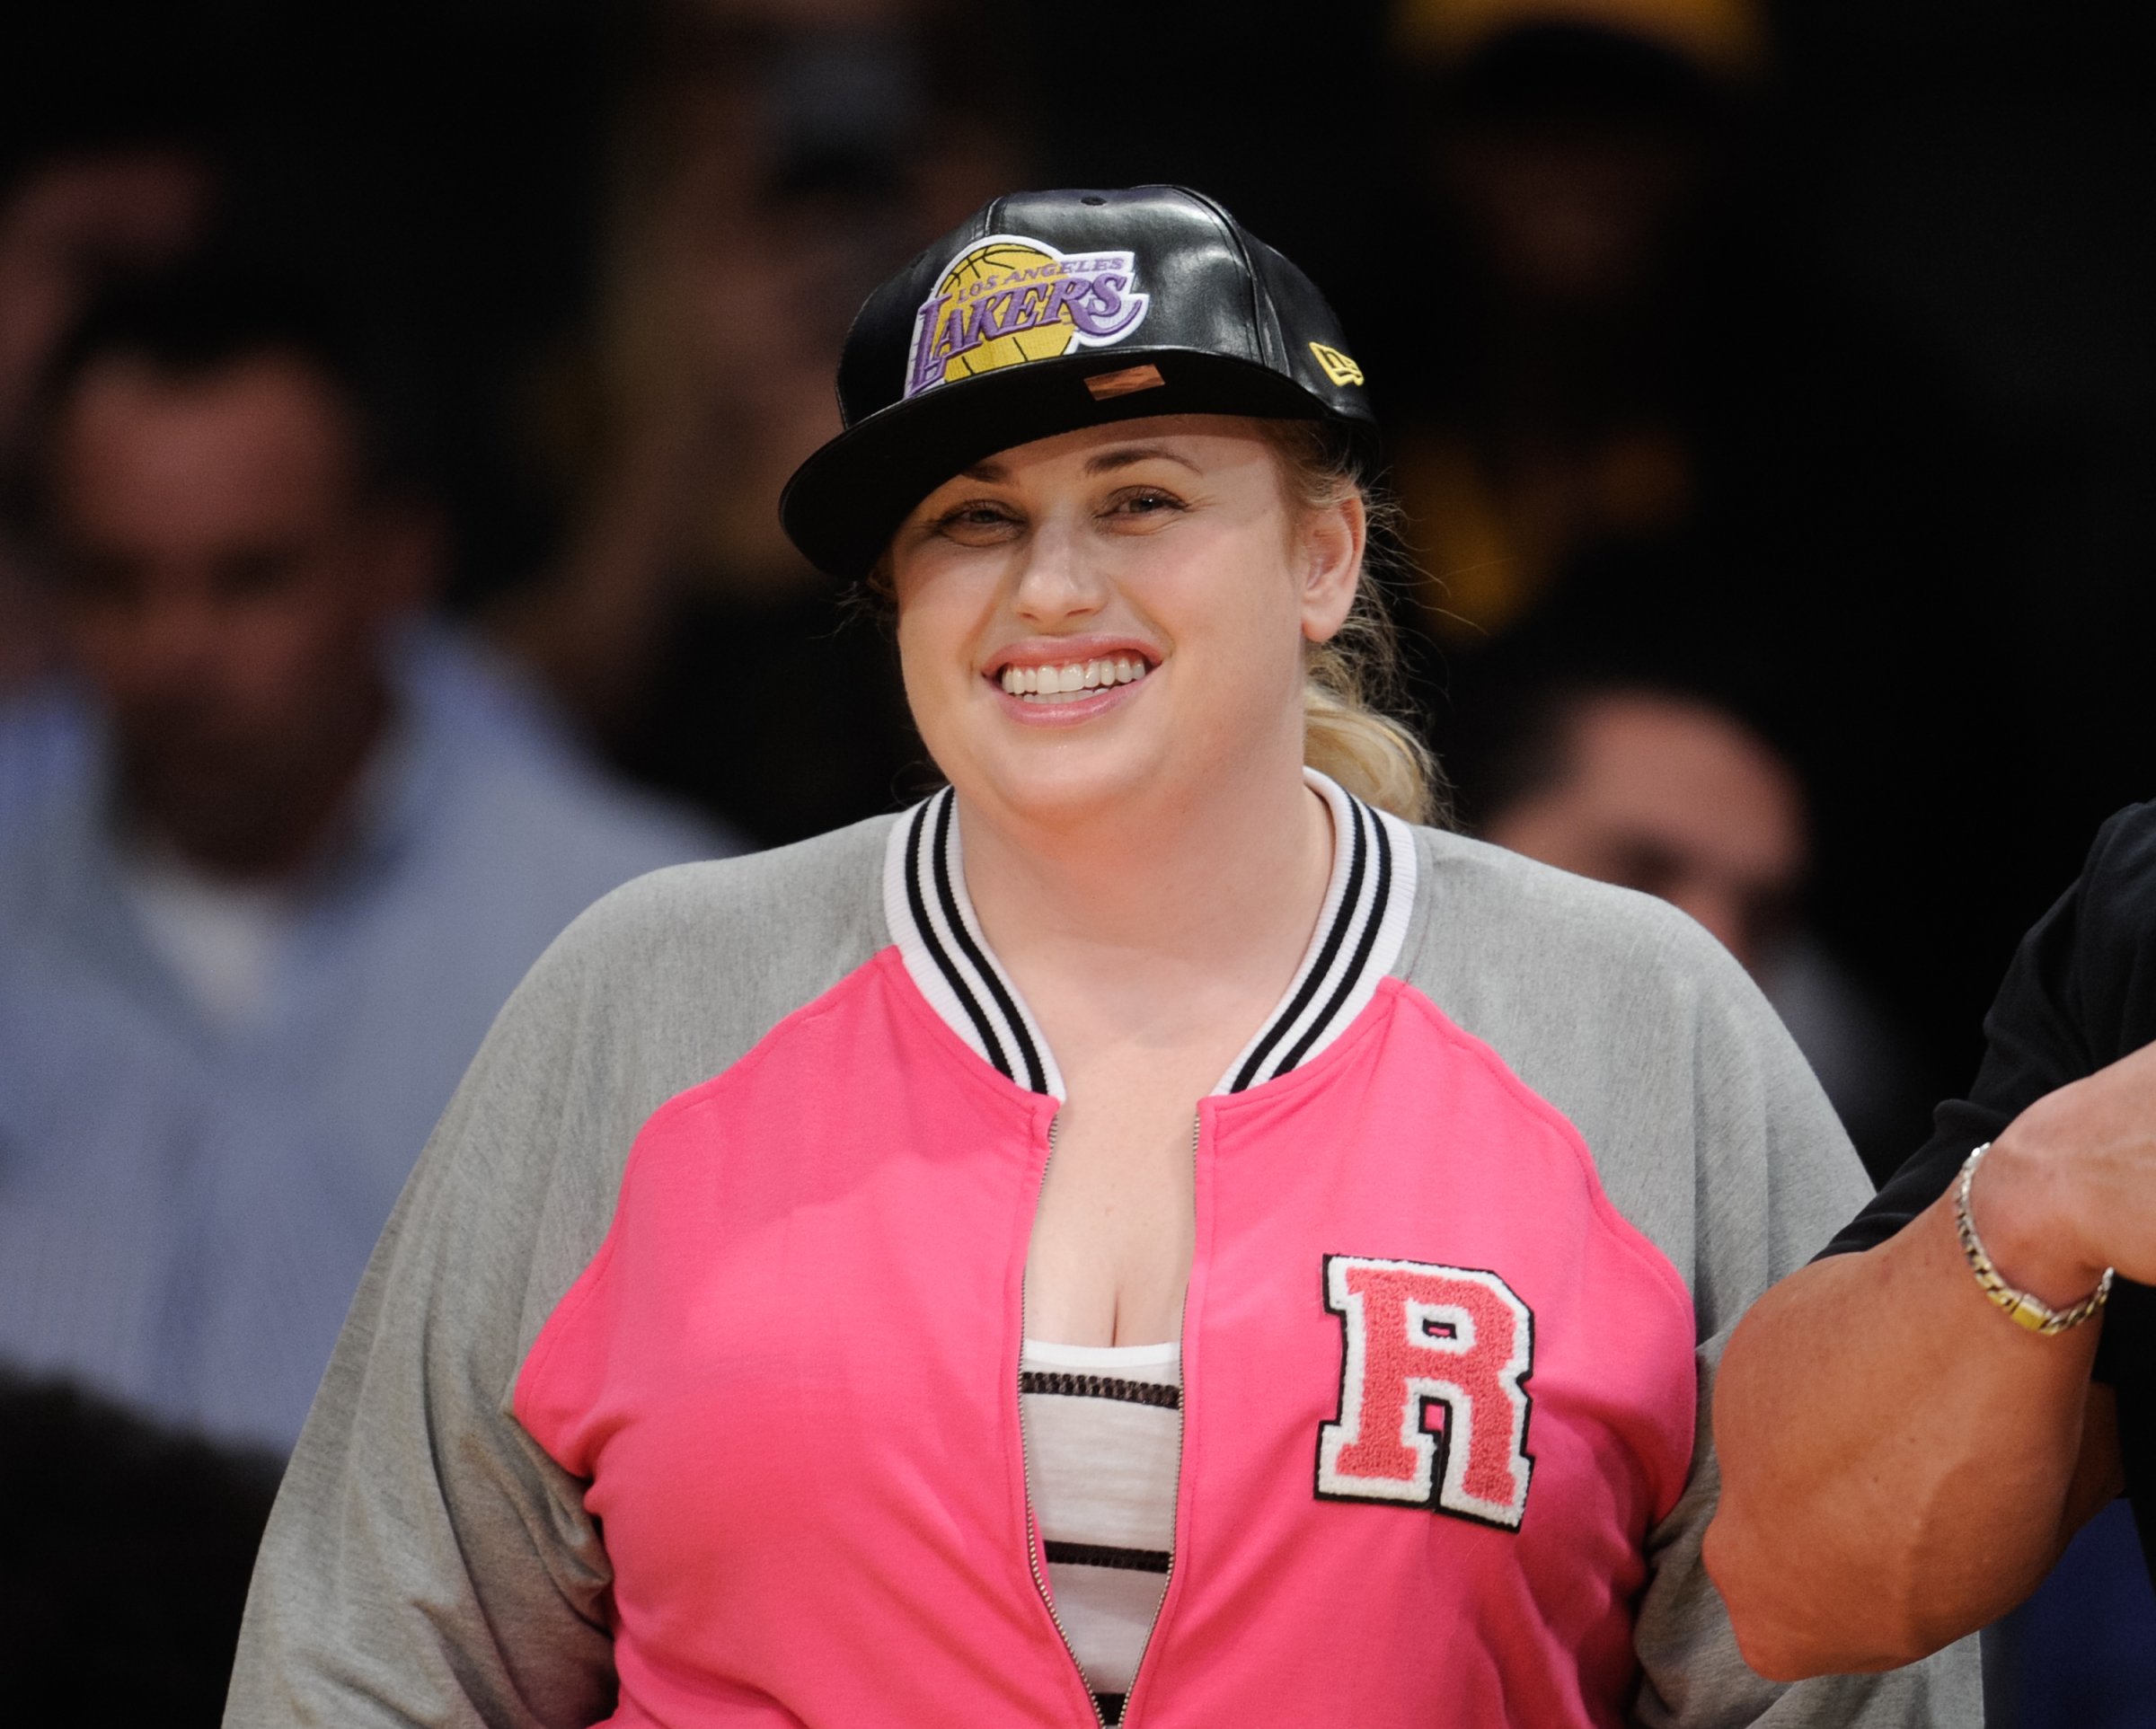 Rebel Wilson attends a basketball game between the Brooklyn Nets and the Los Angeles Lakers at Staples Center on March 1, 2016 in Los Angeles, California.